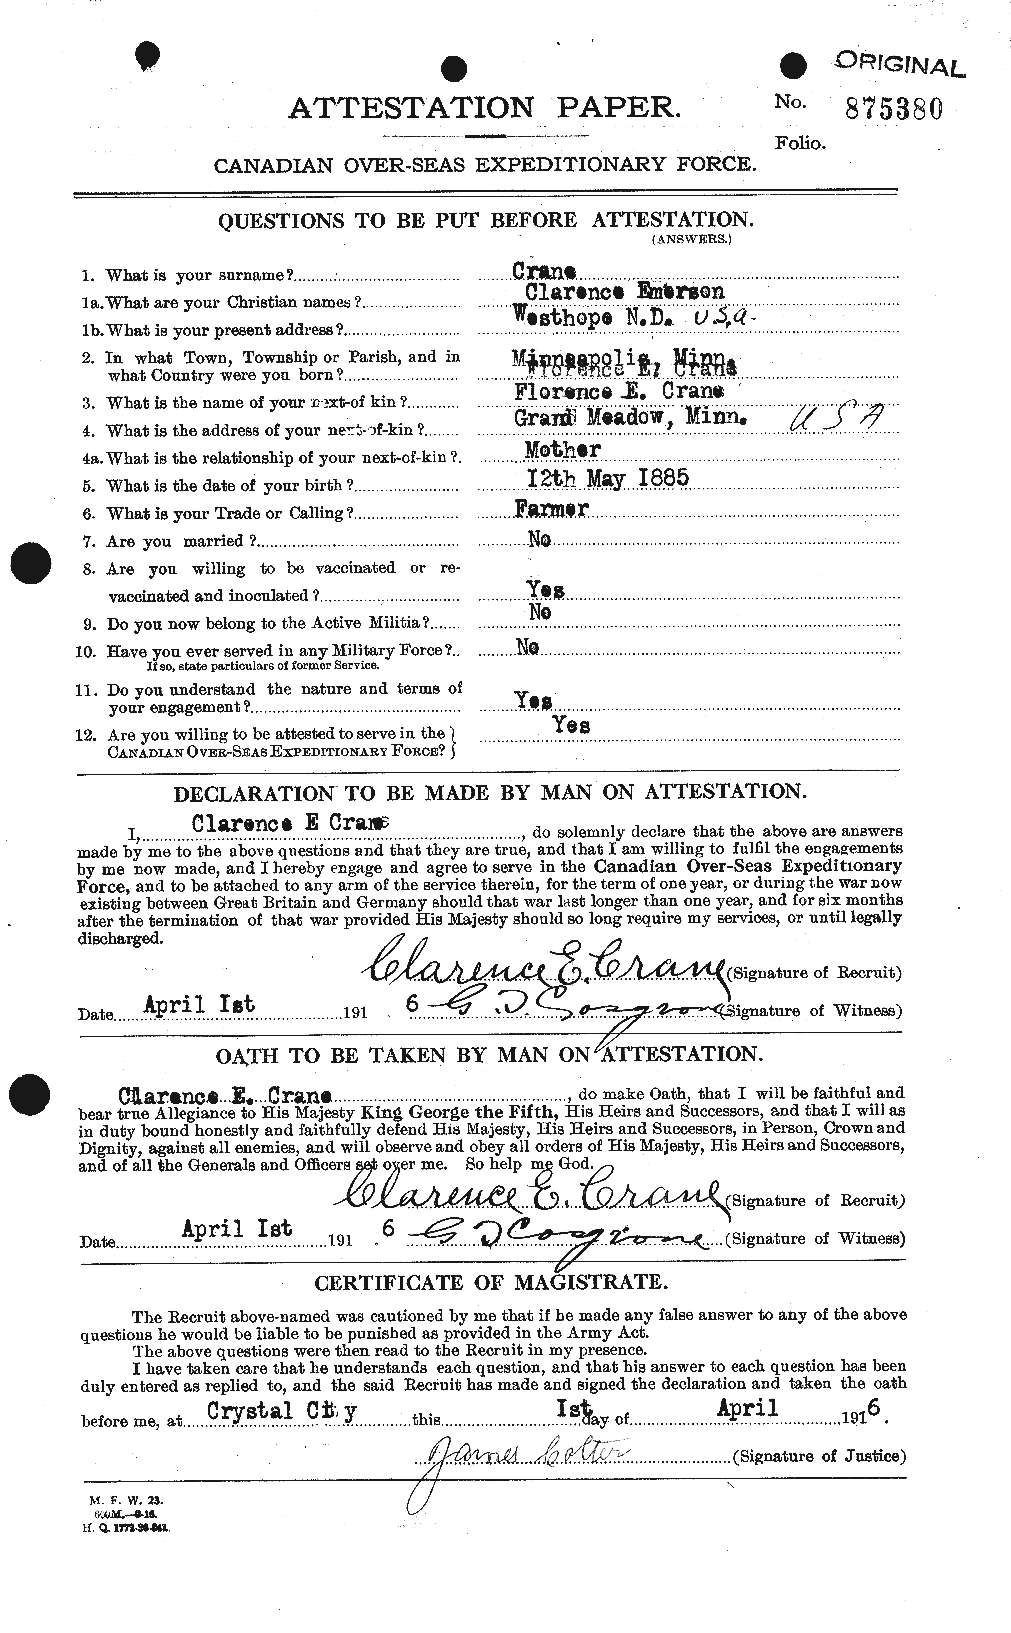 Personnel Records of the First World War - CEF 062022a